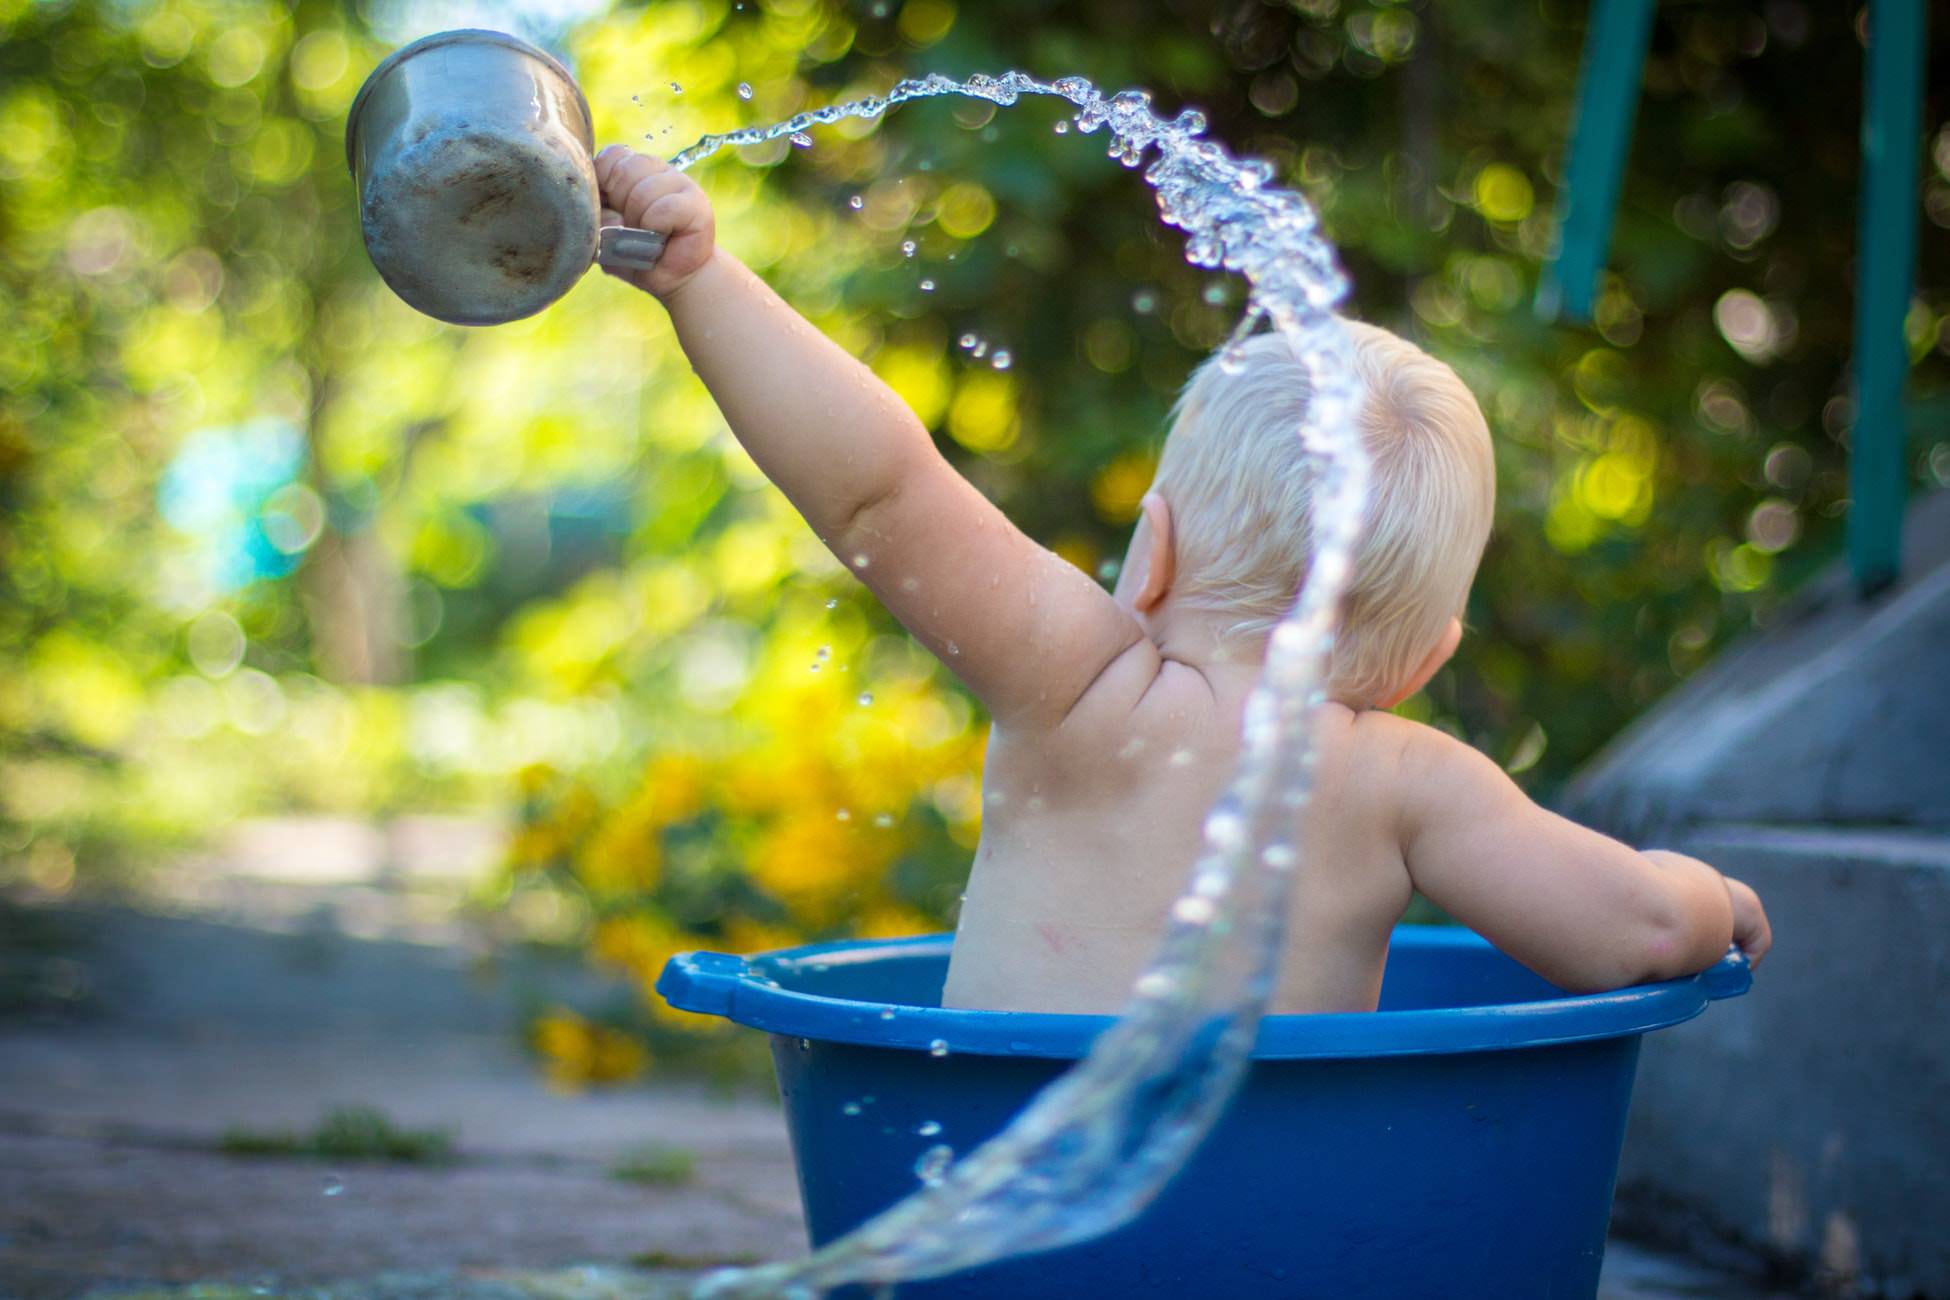 lifestyle photography shot of a little boy in a bucket of water throwing a cup of water in the air